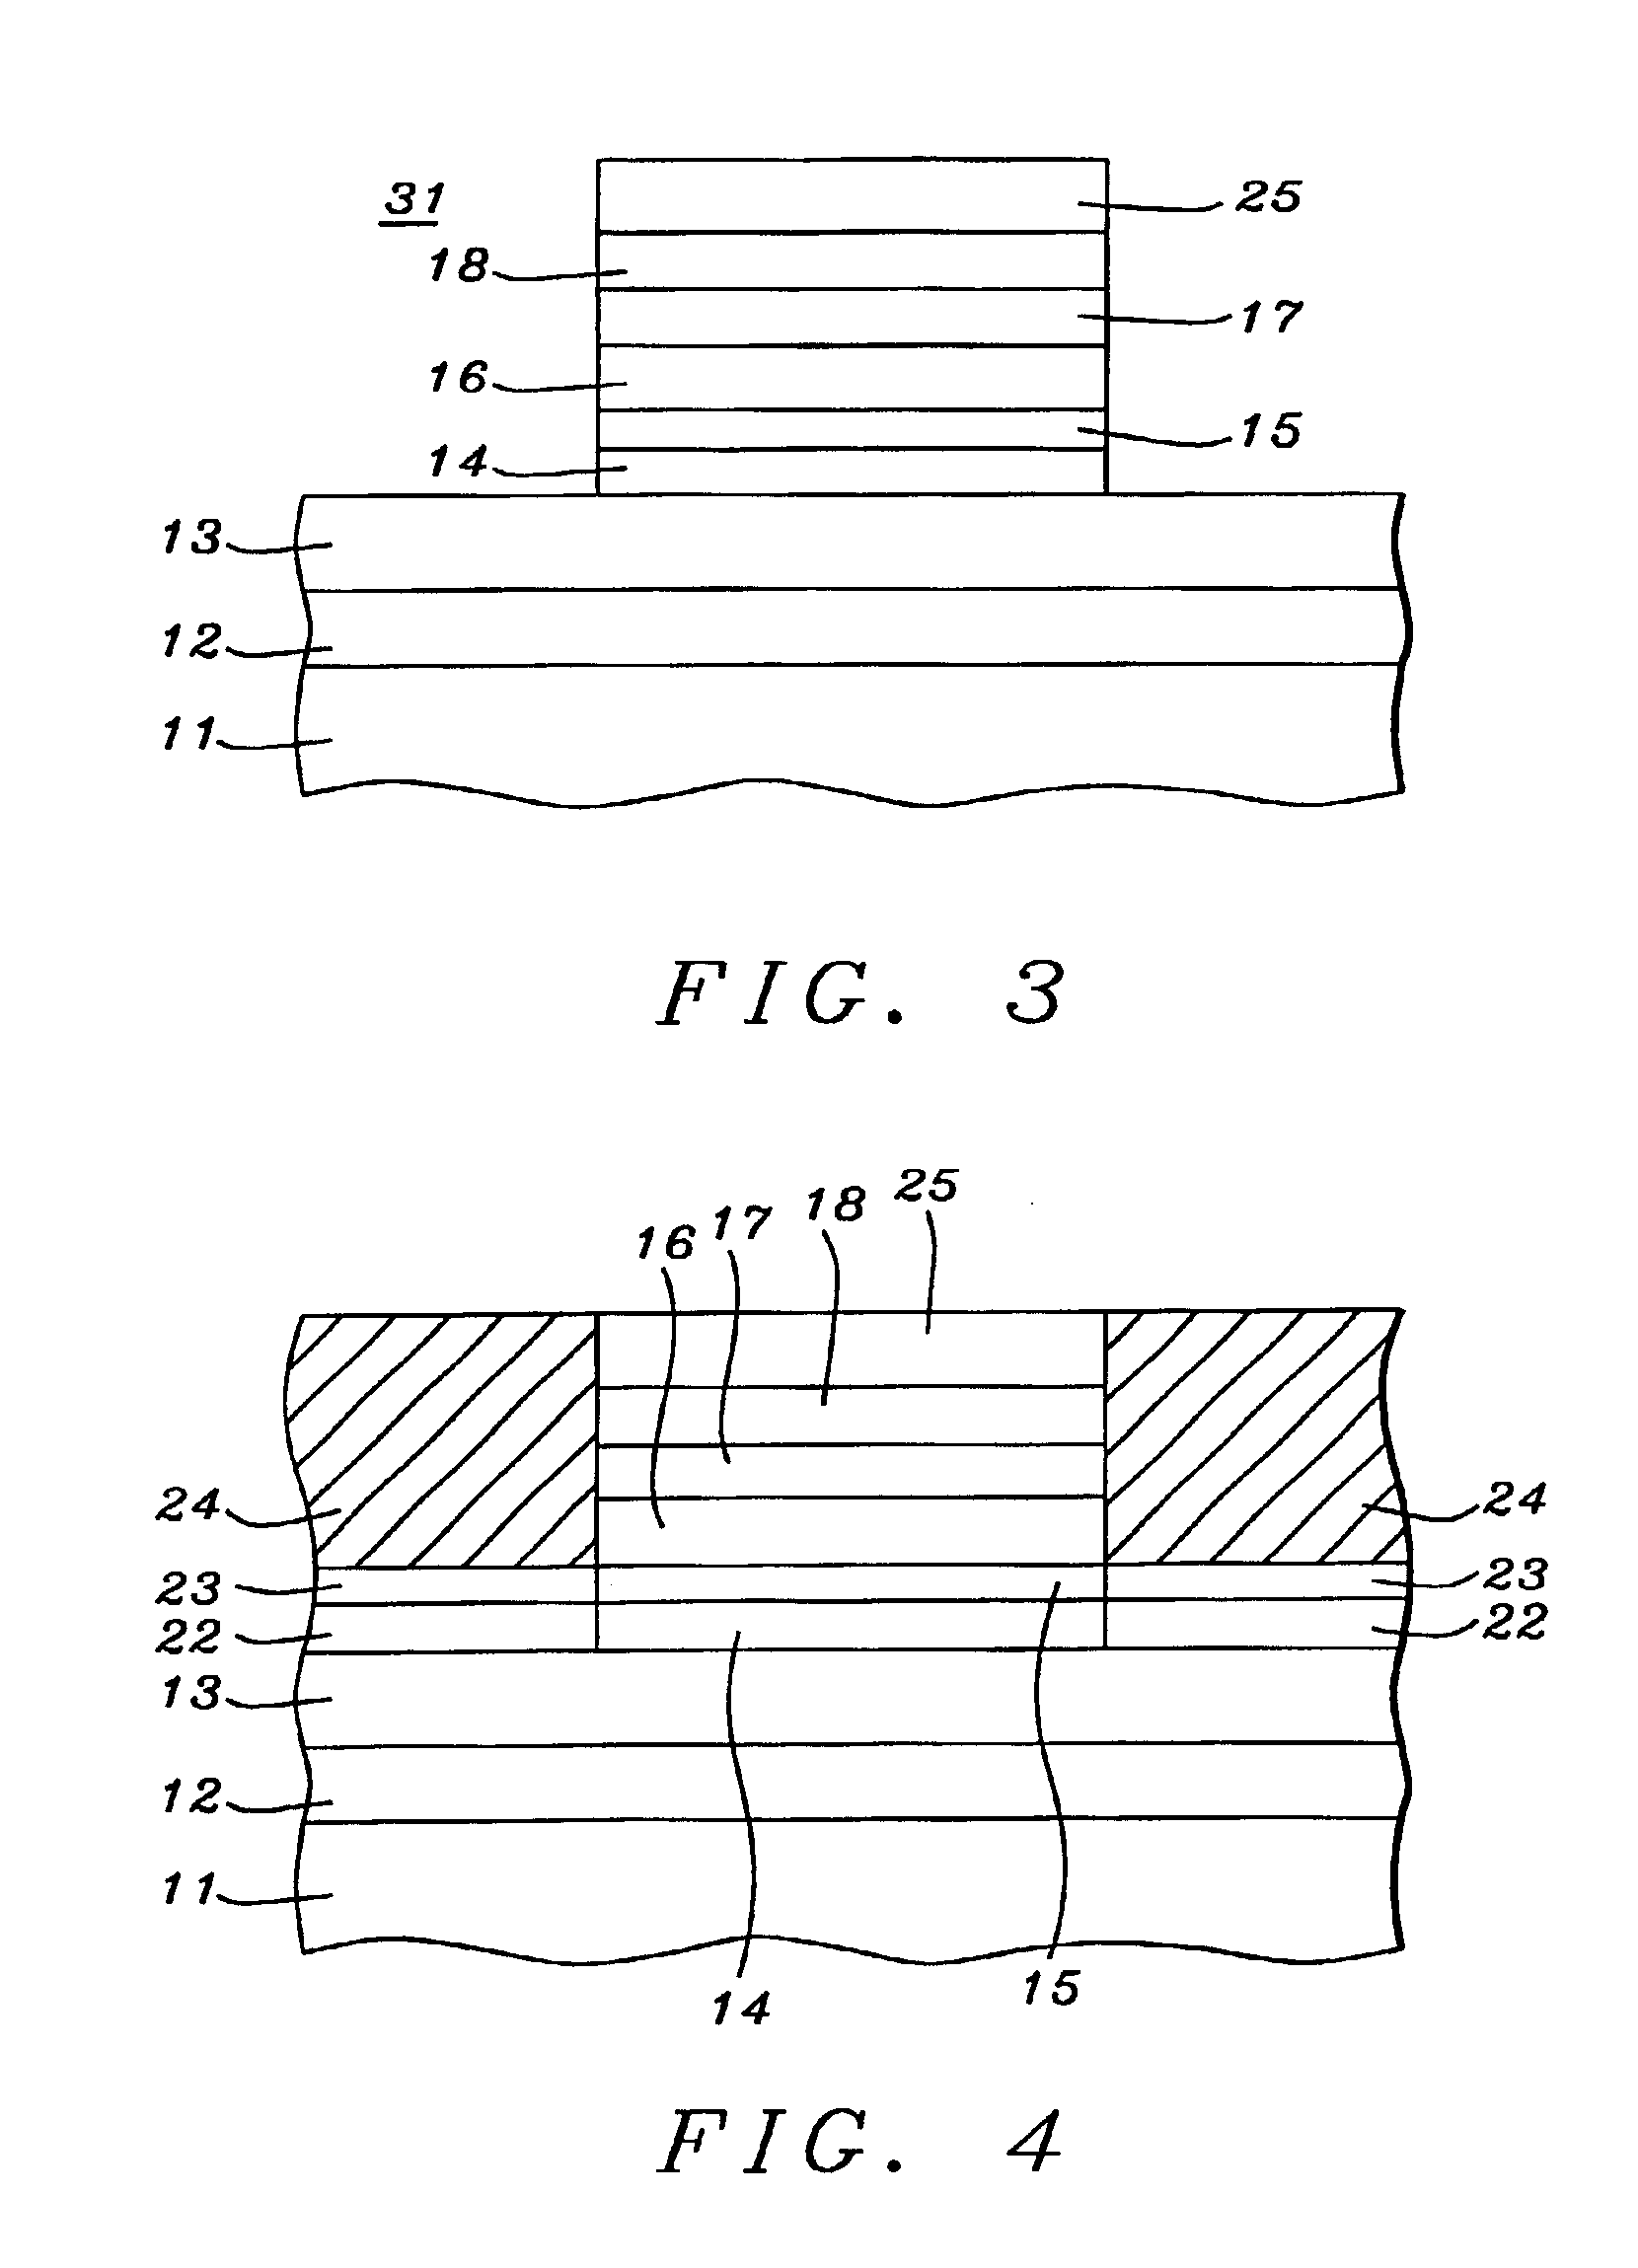 CPP spin valve head with bias point control